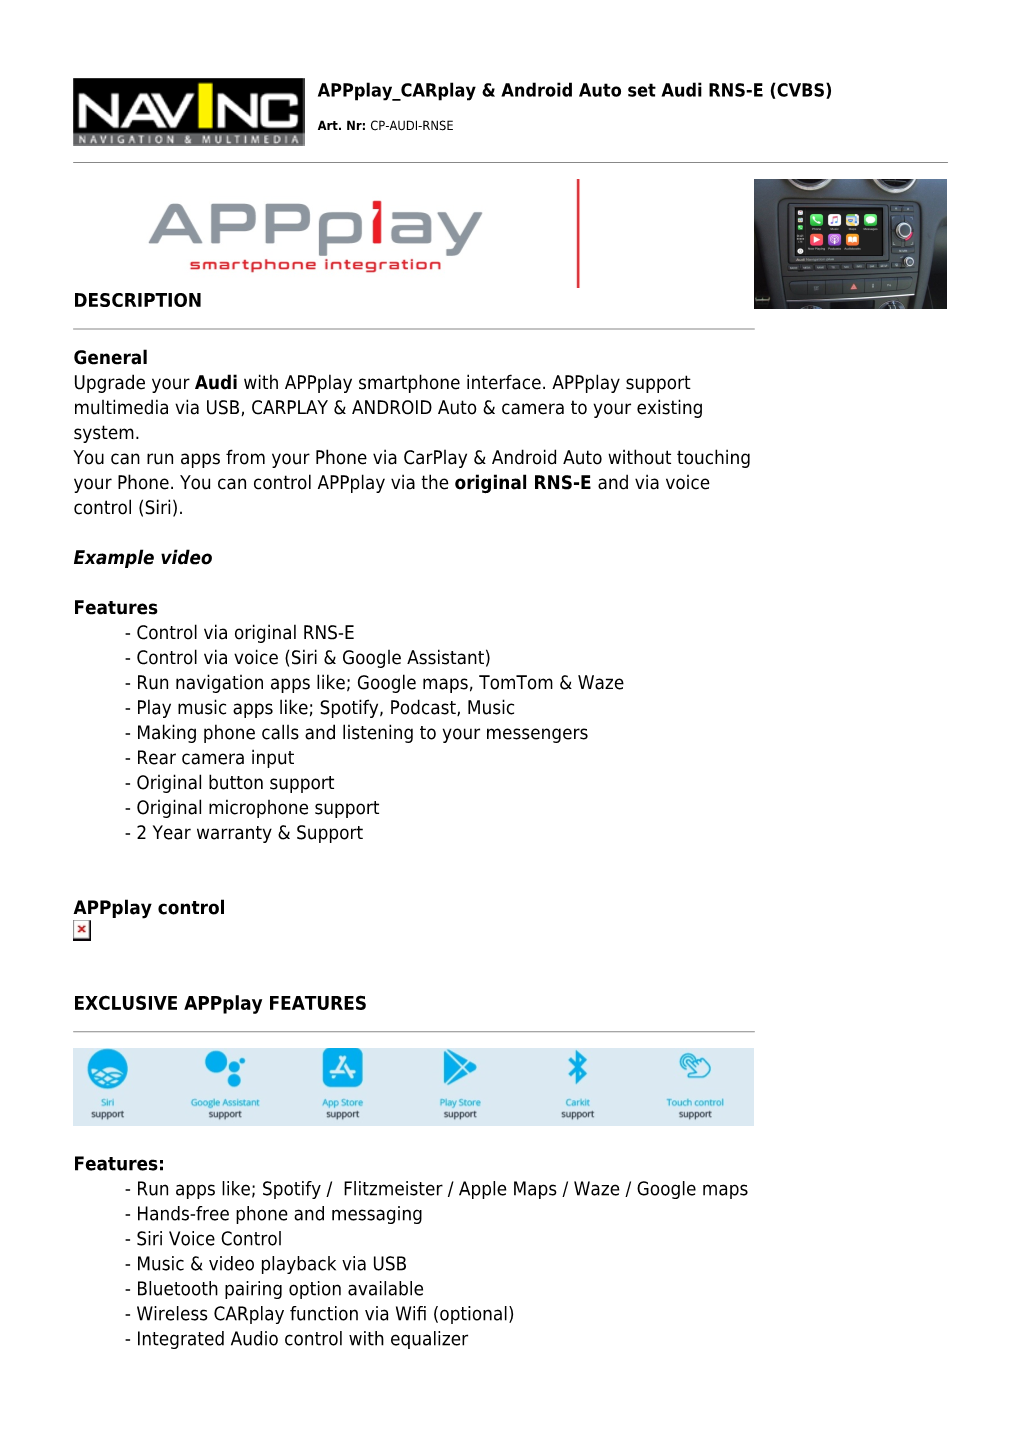 DESCRIPTION General Upgrade Your Audi with Appplay Smartphone